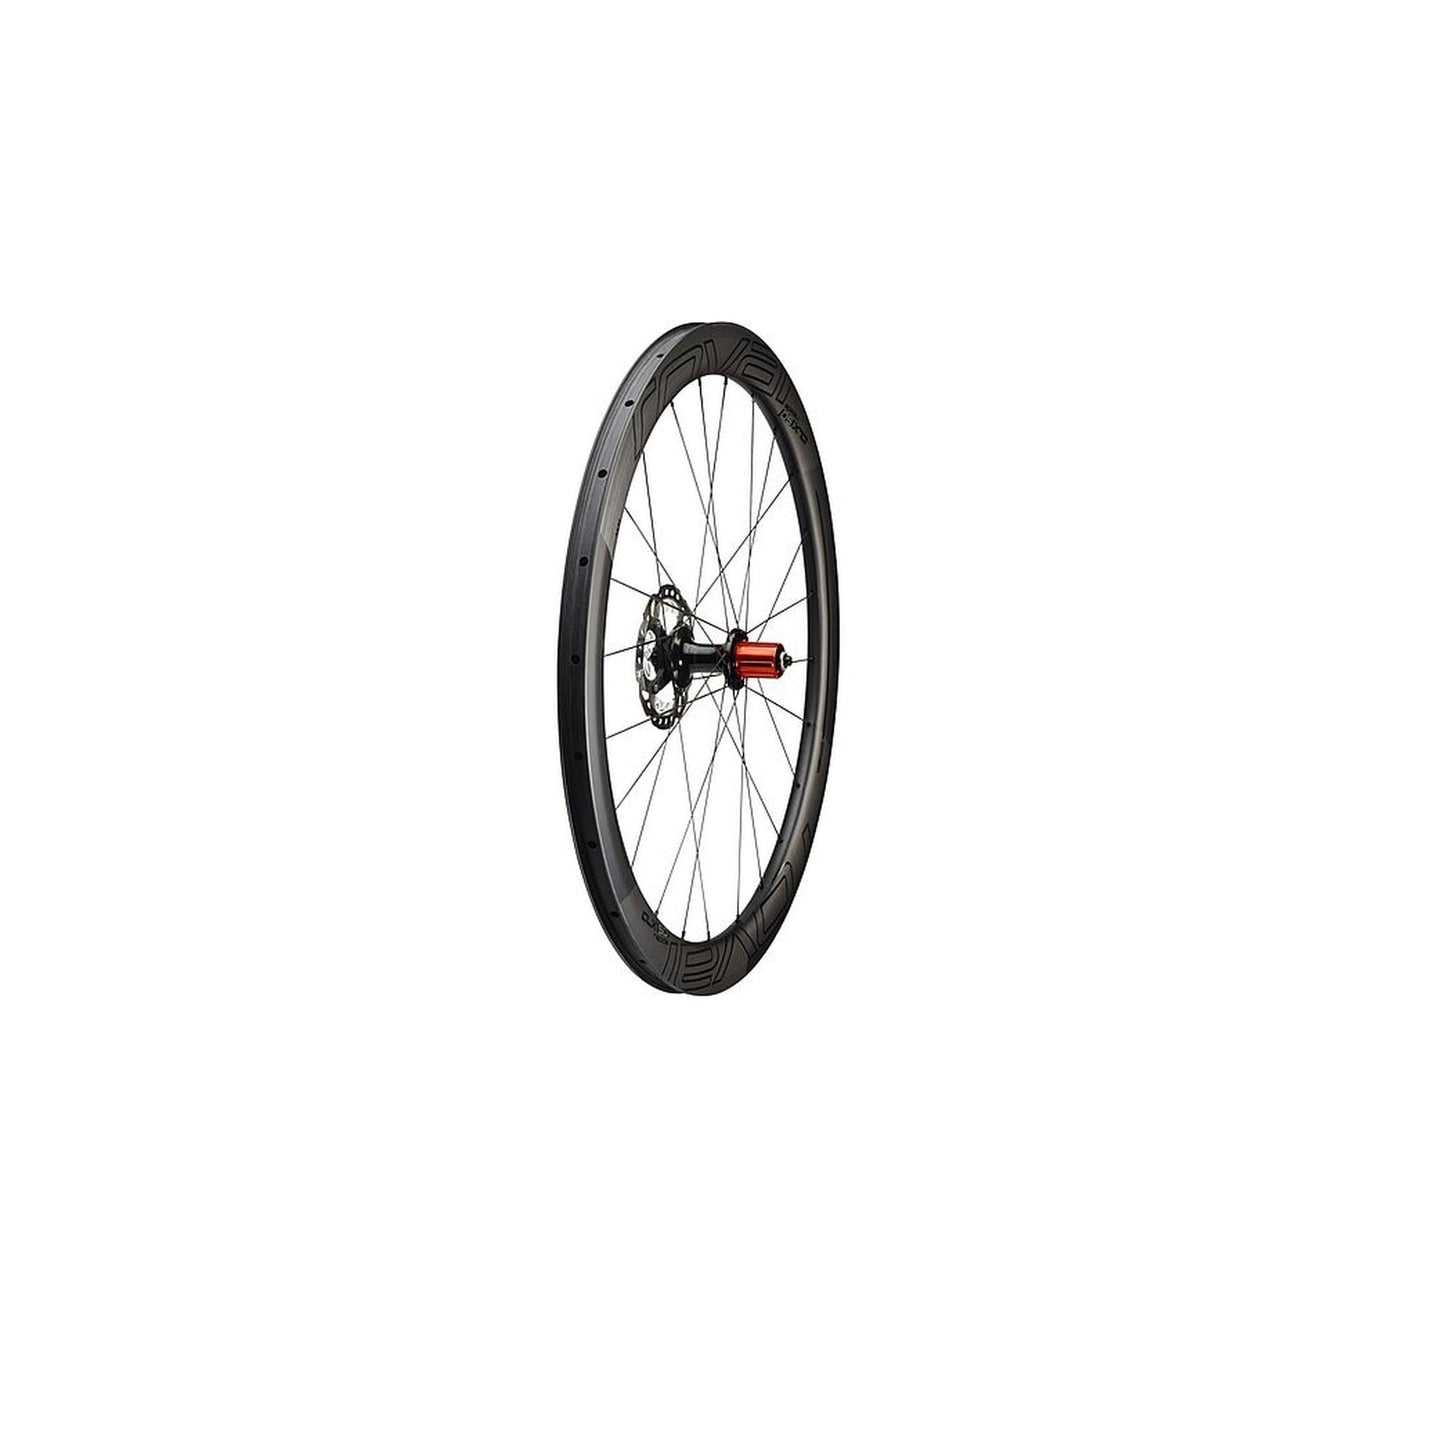 Roval CLX 50 Disc Ð Rear-Cycles Direct Specialized